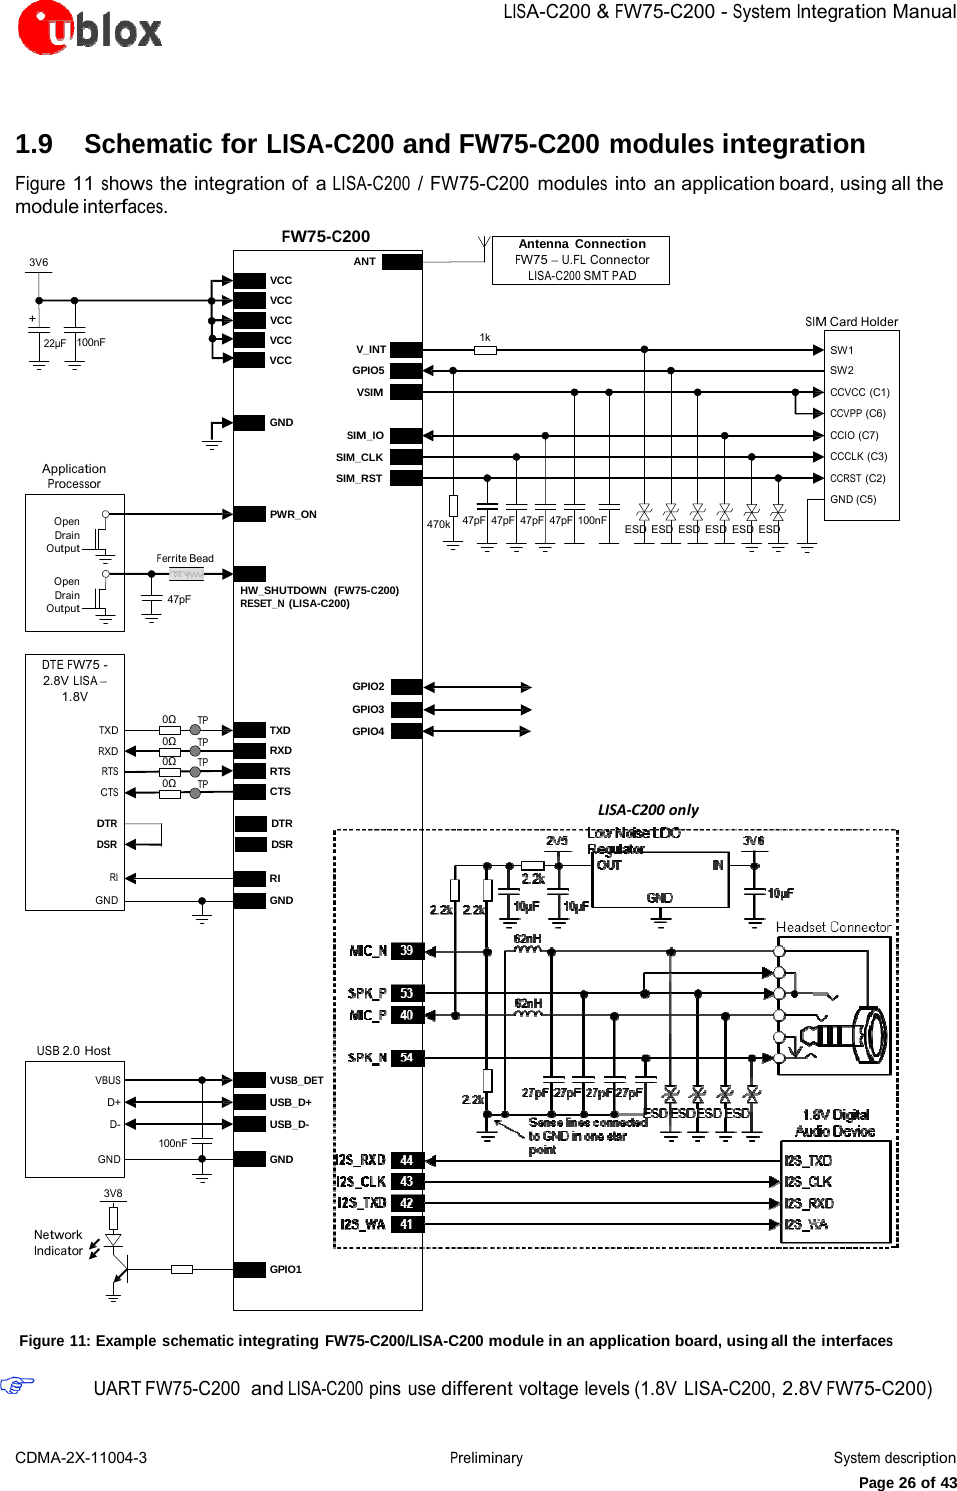 CDMA-2X-11004-3 PreliminarySystem descriptionPage 26 of 43LISA-C200&amp;FW75-C200-System IntegrationManual1.9 Schematic for LISA-C200 and FW75-C200 modules integration Figure 11 shows the integration of a LISA-C200 / FW75-C200 modules into an application board, using all the module interfaces. 3V6 + 22µF 100nF FW75-C200 ANT VCC VCC VCC VCC V_INT Antenna Connection FW75 – U.FL Connector LISA-C200 SMT PAD 1k SIM Card Holder SW1 Application Processor Open Drain Output Ferrite Bead VCC GND PWR_ON GPIO5 VSIM SIM_IO SIM_CLK SIM_RST 470k 47pF 47pF 47pF 47pF 100nF ESD ESD ESD ESD ESD ESD SW2 CCVCC (C1) CCVPP (C6) CCIO (C7) CCCLK (C3) CCRST (C2) GND (C5) Open Drain Output 47pF HW_SHUTDOWN  (FW75-C200) RESET_N (LISA-C200) DTE FW75 - 2.8V LISA – 1.8V TXD RXD RTS CTS DTR DSR 0  TP 0  TP 0  TP 0  TP TXD RXD RTS CTS DTR DSR GPIO2 GPIO3 GPIO4 LISA‐C200onlyRI GND RI GND USB 2.0 Host VBUS D+ D- GND 100nF VUSB_DET USB_D+ USB_D- GND 3V8 Network Indicator GPIO1 Figure 11: Example schematic integrating FW75-C200/LISA-C200 module in an application board, using all the interfaces             UART FW75-C200  and LISA-C200 pins use different voltage levels (1.8V  LISA-C200, 2.8V FW75-C200) 